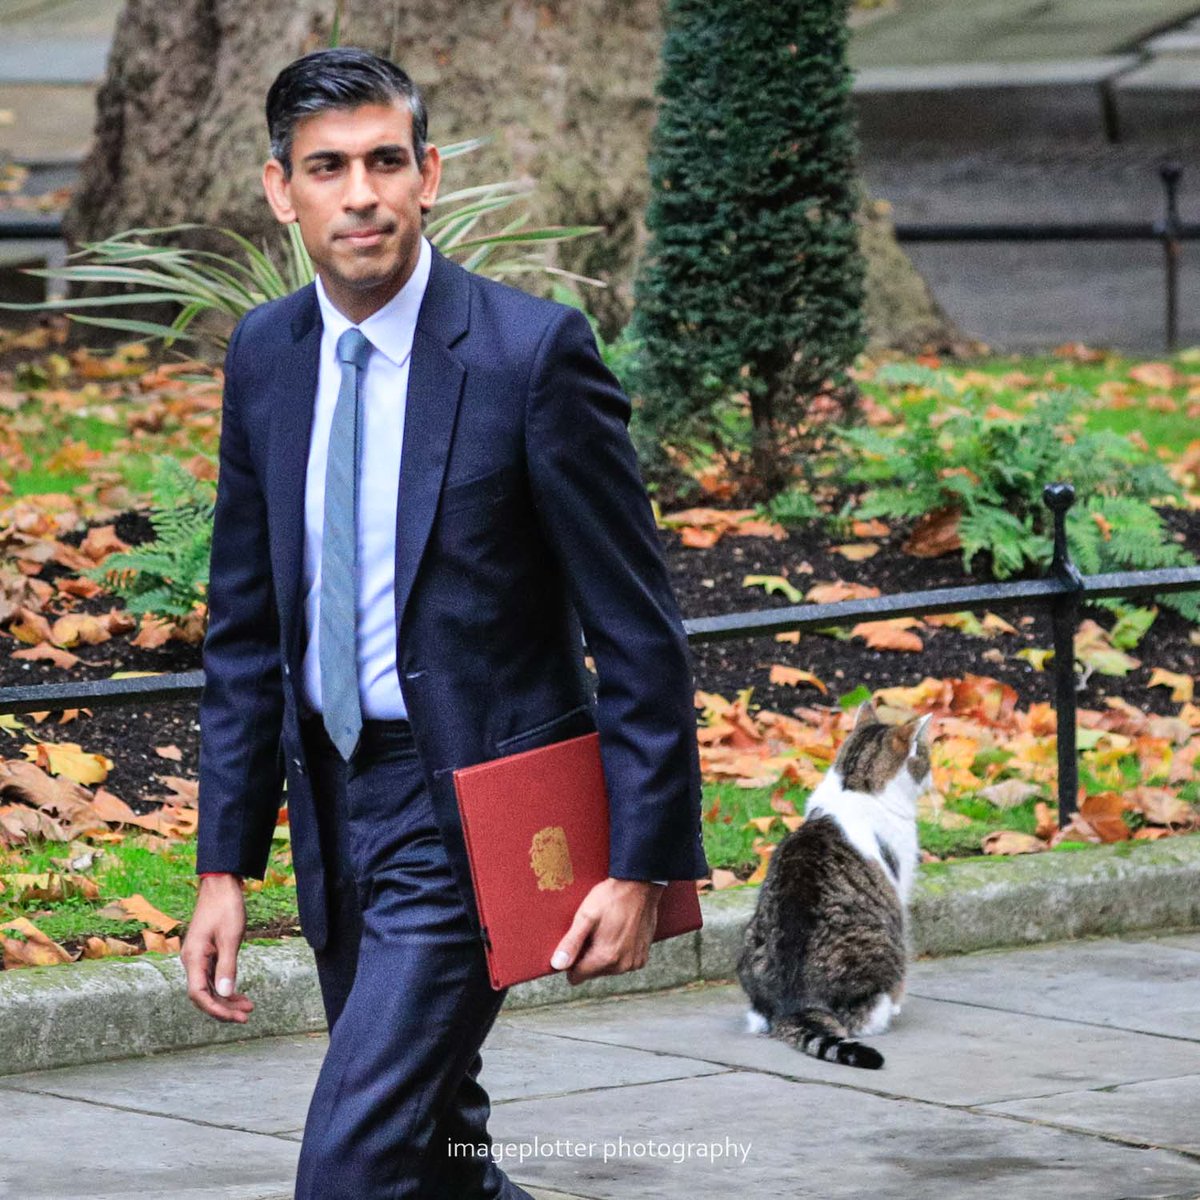 And last, but very definitely not least: @Number10cat . He snoozed, he licked his bum for a good five minutes, he stared at the cameras, inspected the Foreign Office bike storage, went to the loo in the flowerbeds, and ignored new PM Rishi Sunak. Good day in Larryland.